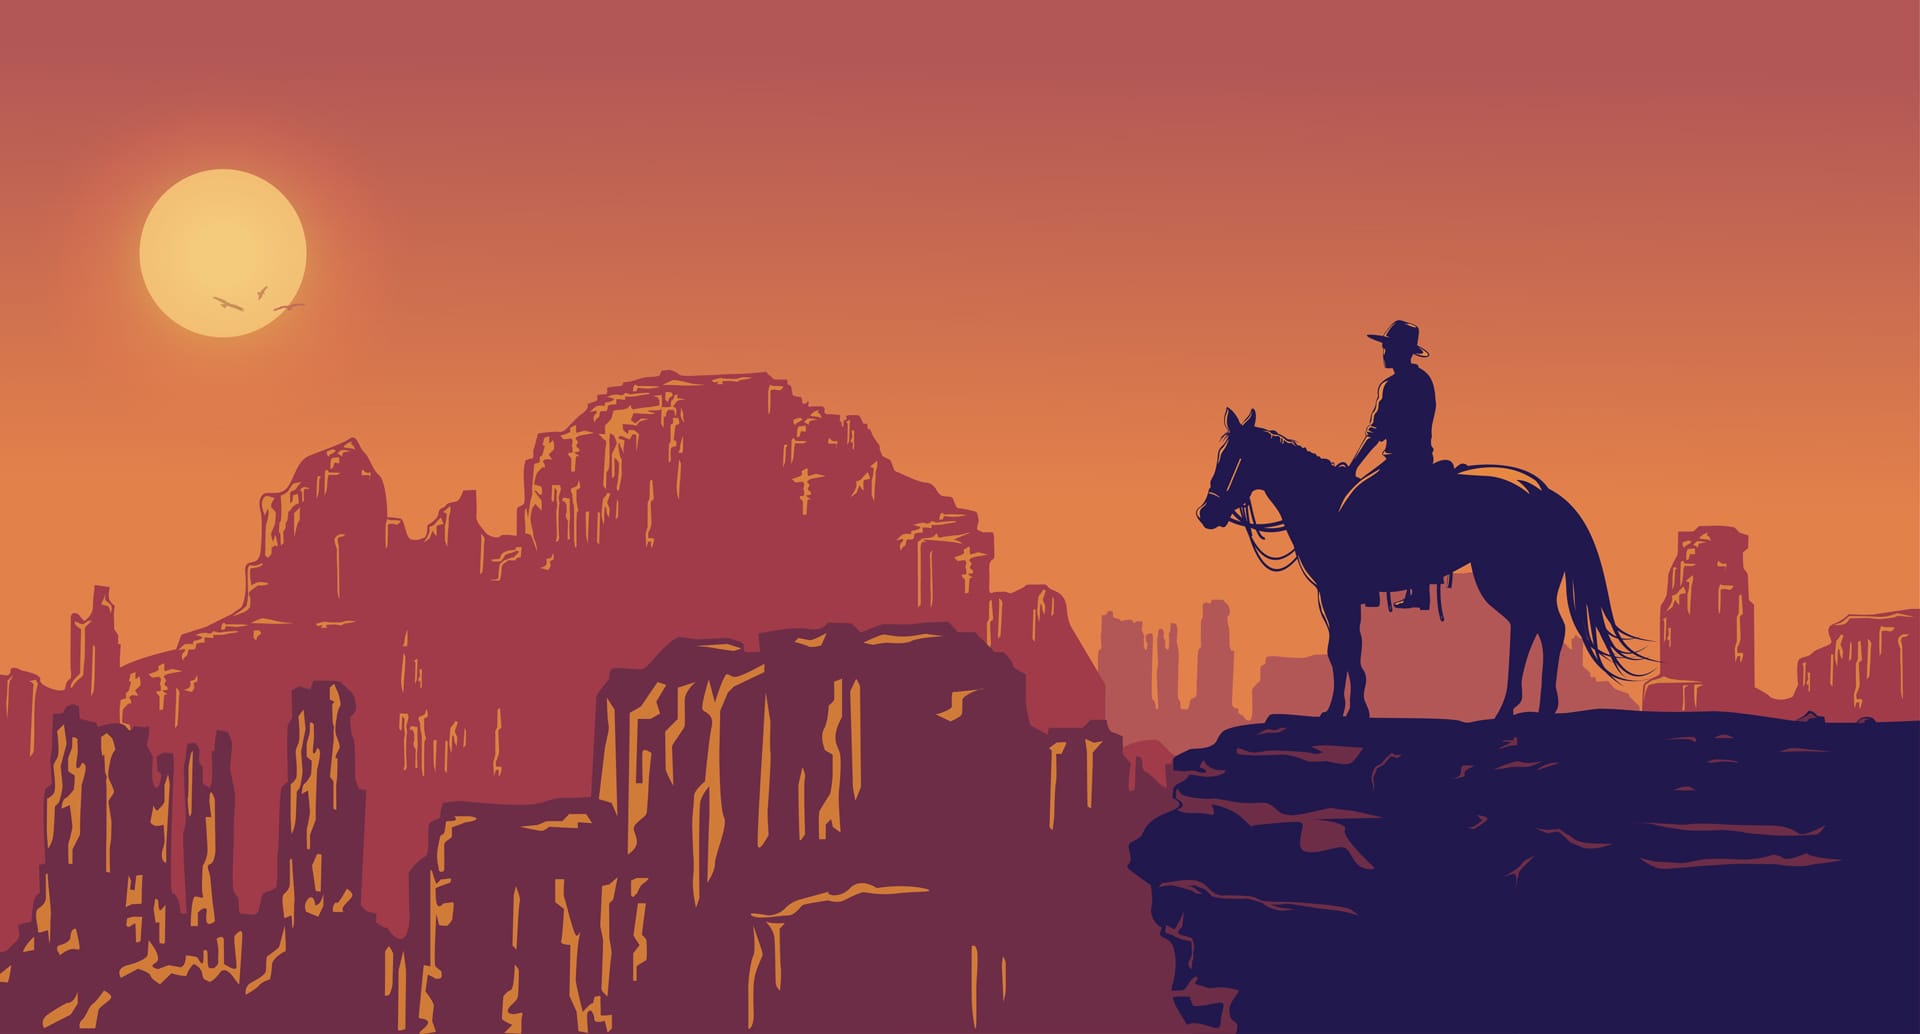 Silhouette lonesome cowboy riding horse sunset illustration